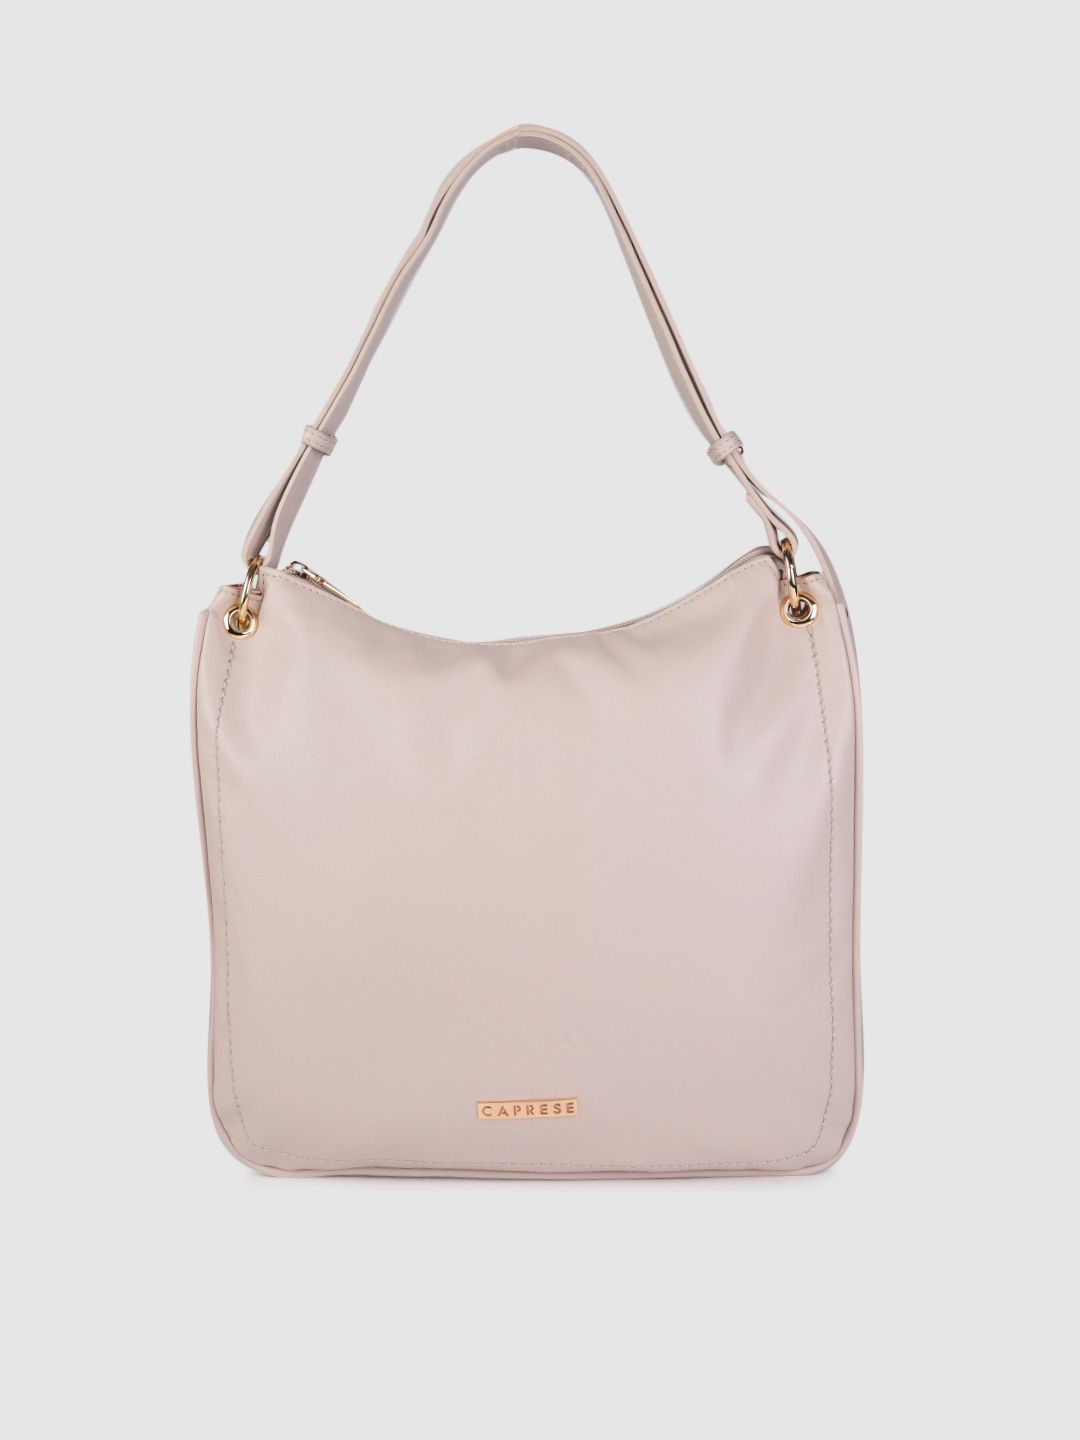 Caprese Nude-Coloured PU Structured Hobo Bag Price in India